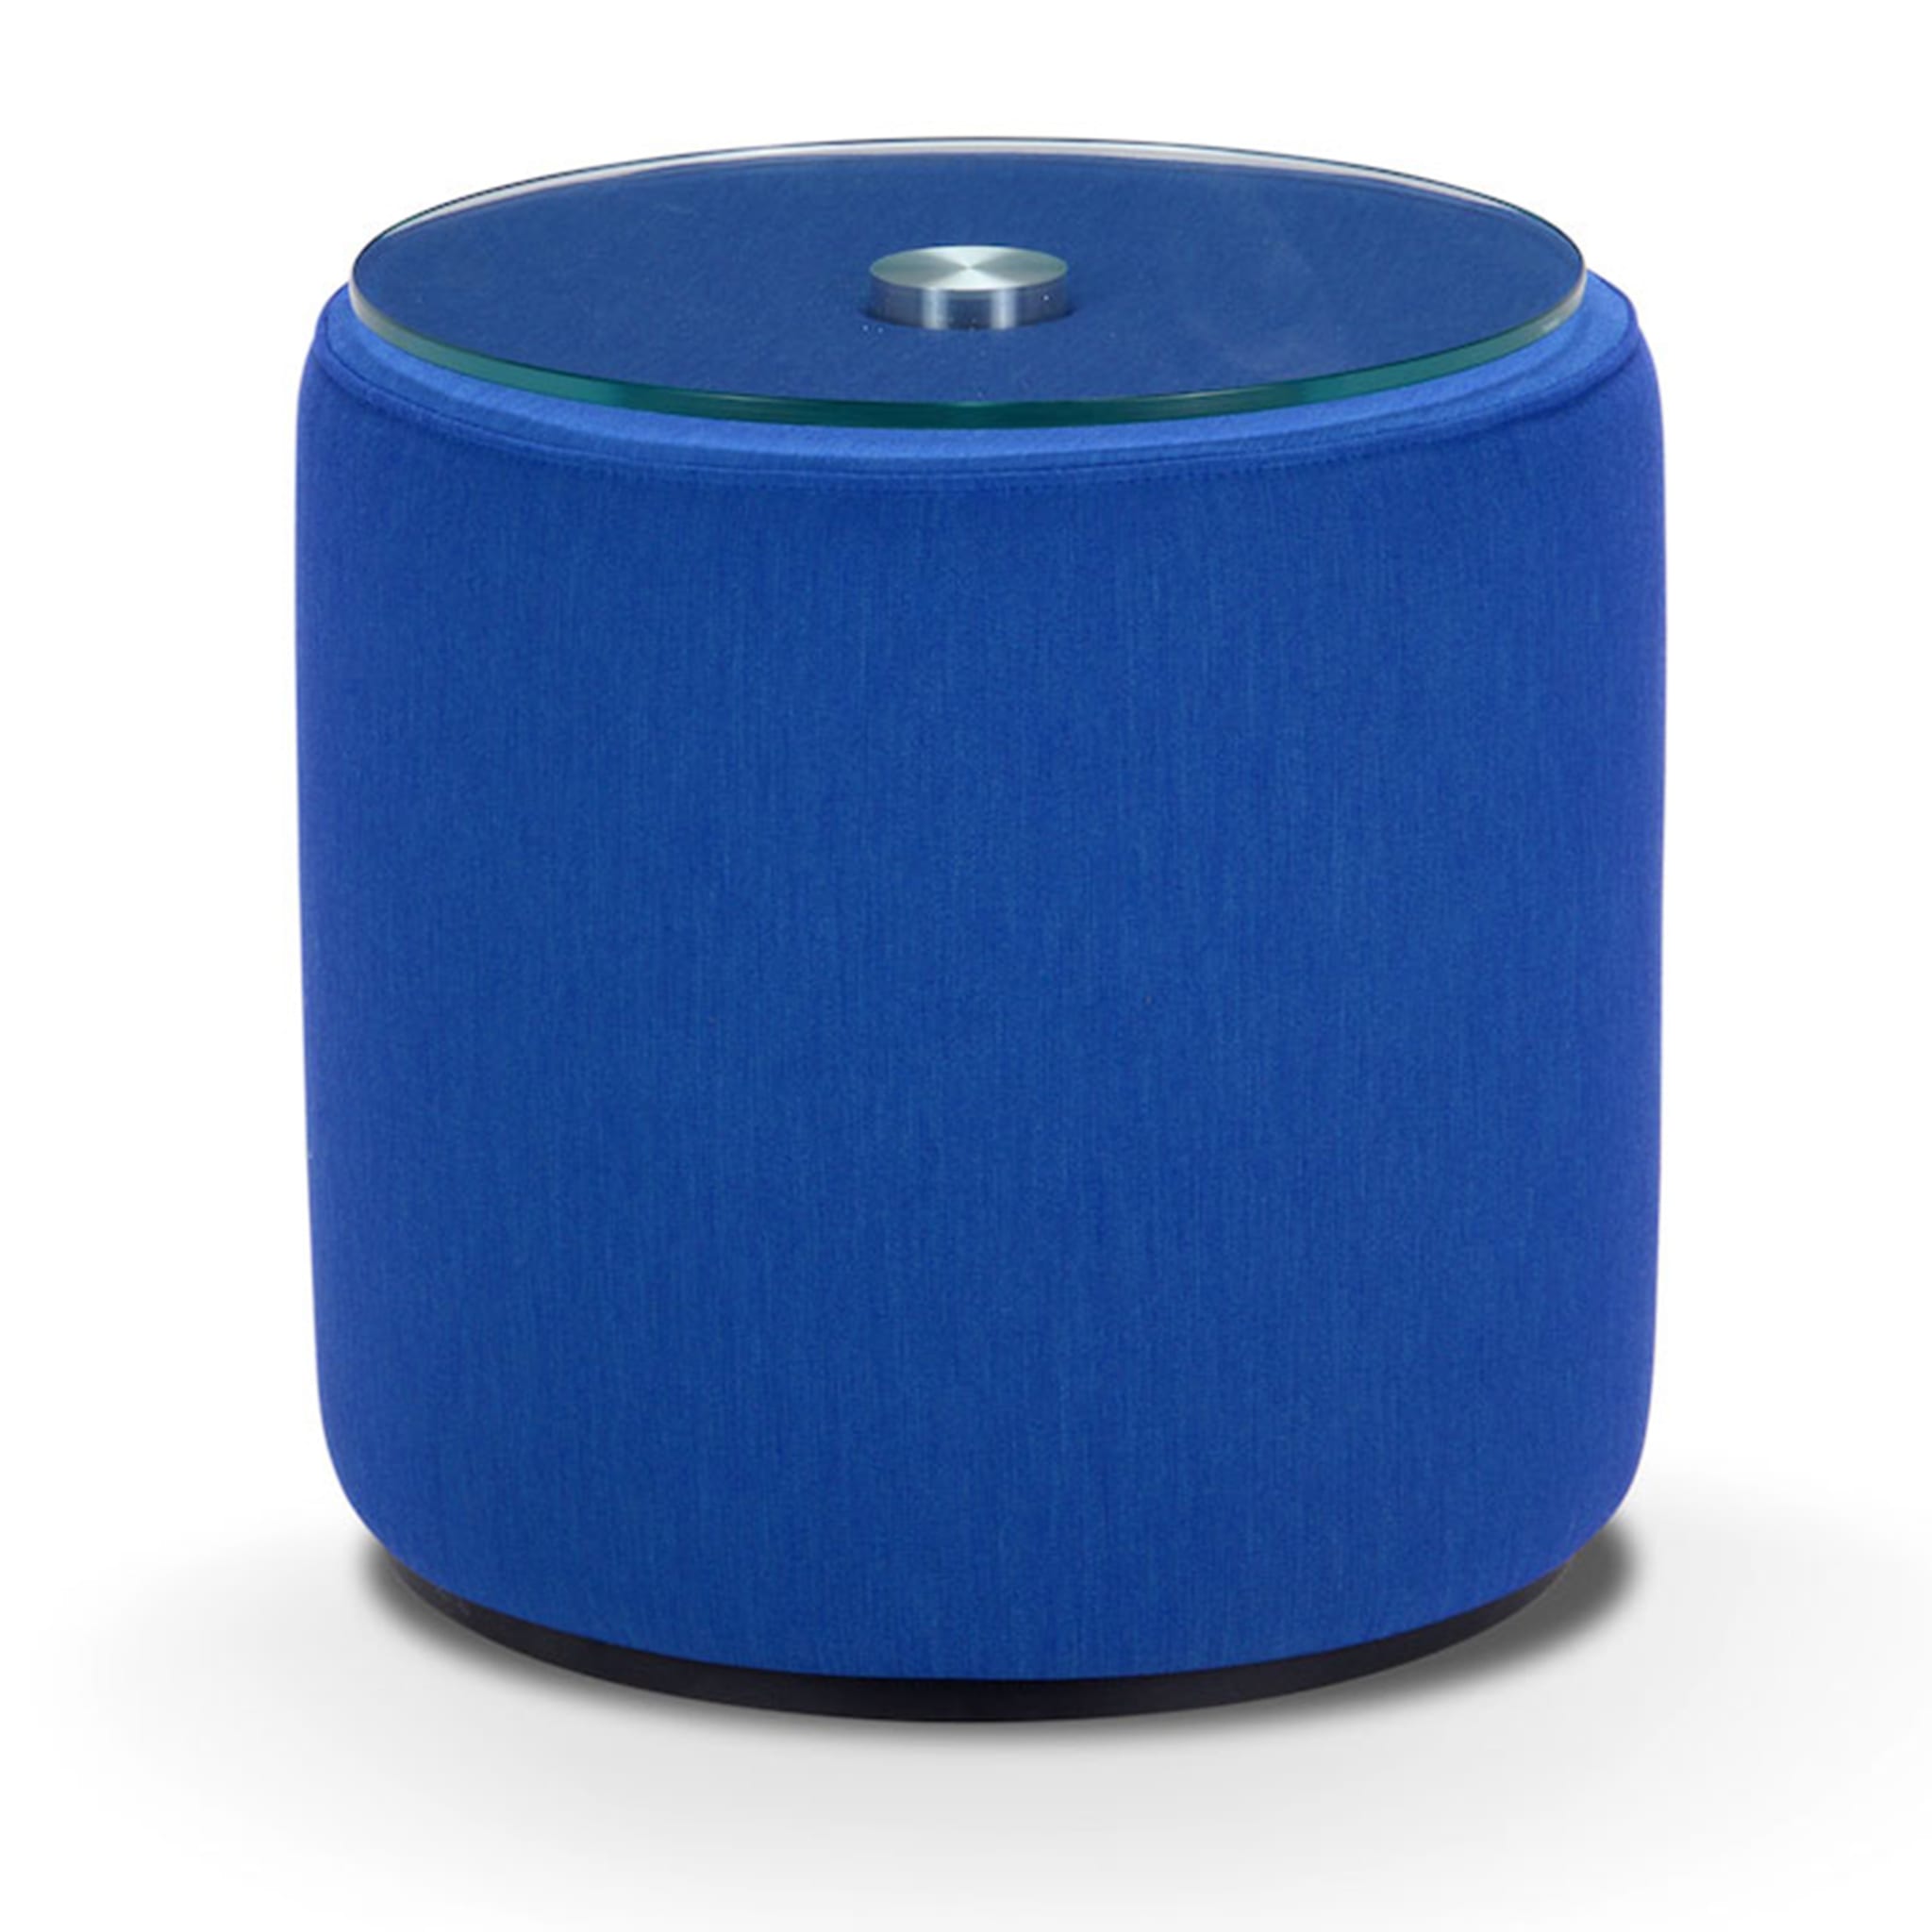 Boll Cylindrical Blue Accent Table by Simone Micheli - Alternative view 2